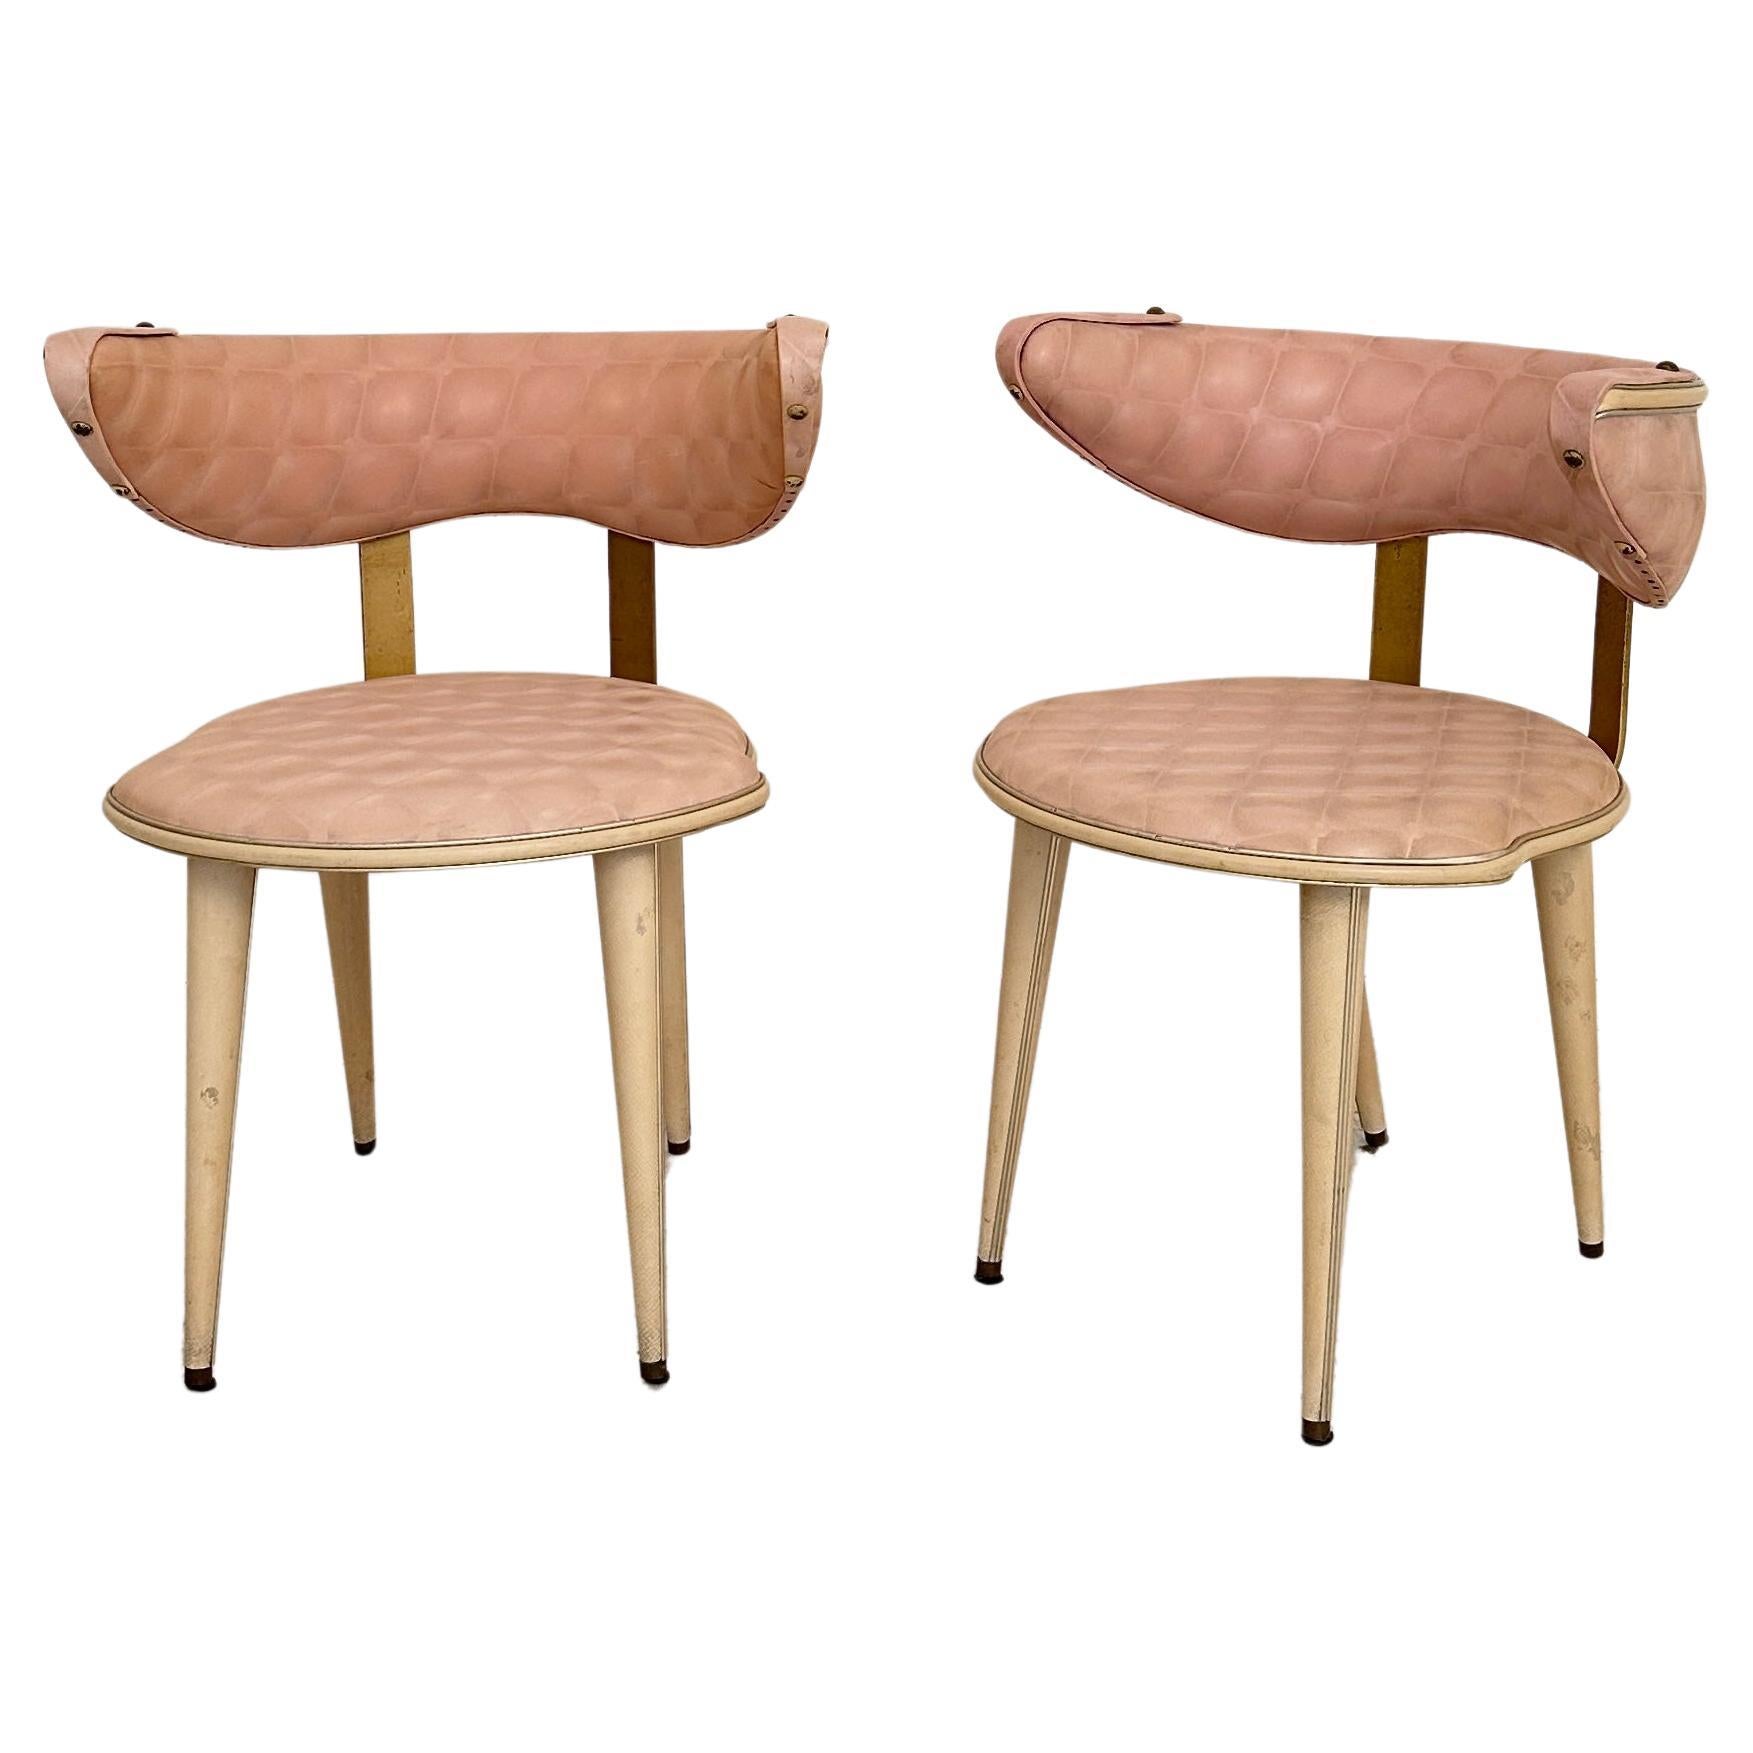 Pair of Mid Century Armchairs by Umberto Mascagni, light pink and white, 1954 For Sale